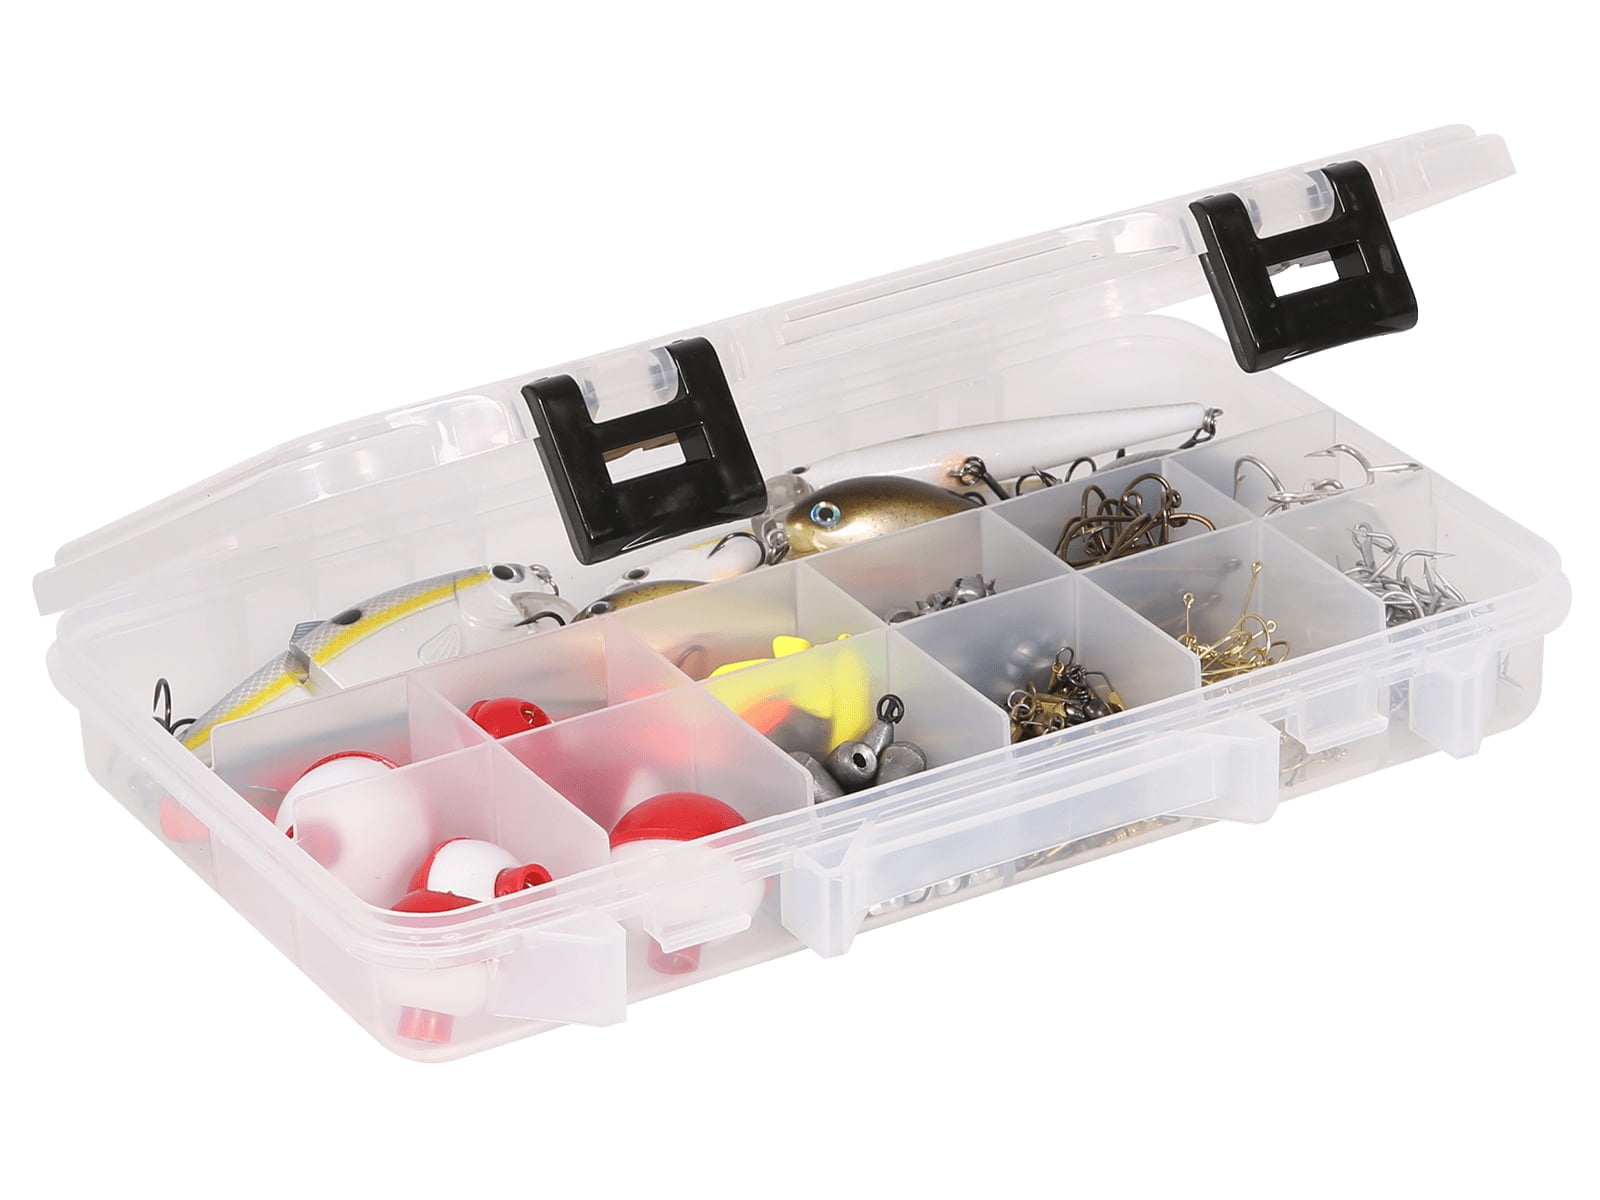 Plano Synergy, Inc. 2361301 Tackle Tray, 3600, 13 Compartment